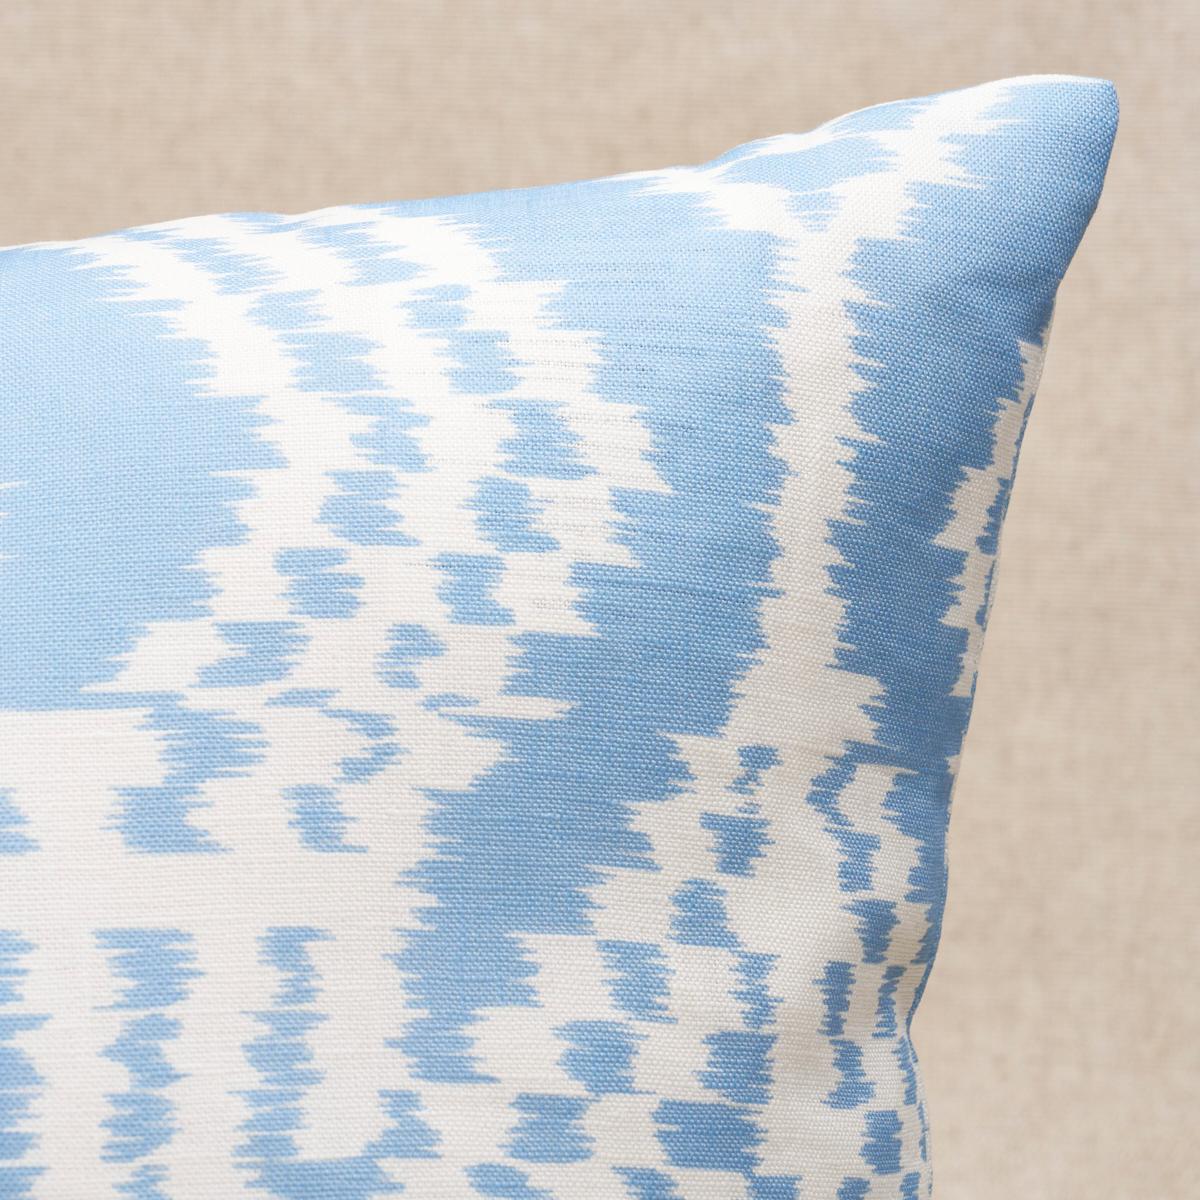 This pillow features Asaka Ikat with a knife edge finish. This relaxed, contemporary ikat is printed on unbleached linen. Pillow includes a feather/down fill insert and hidden zipper closure.
